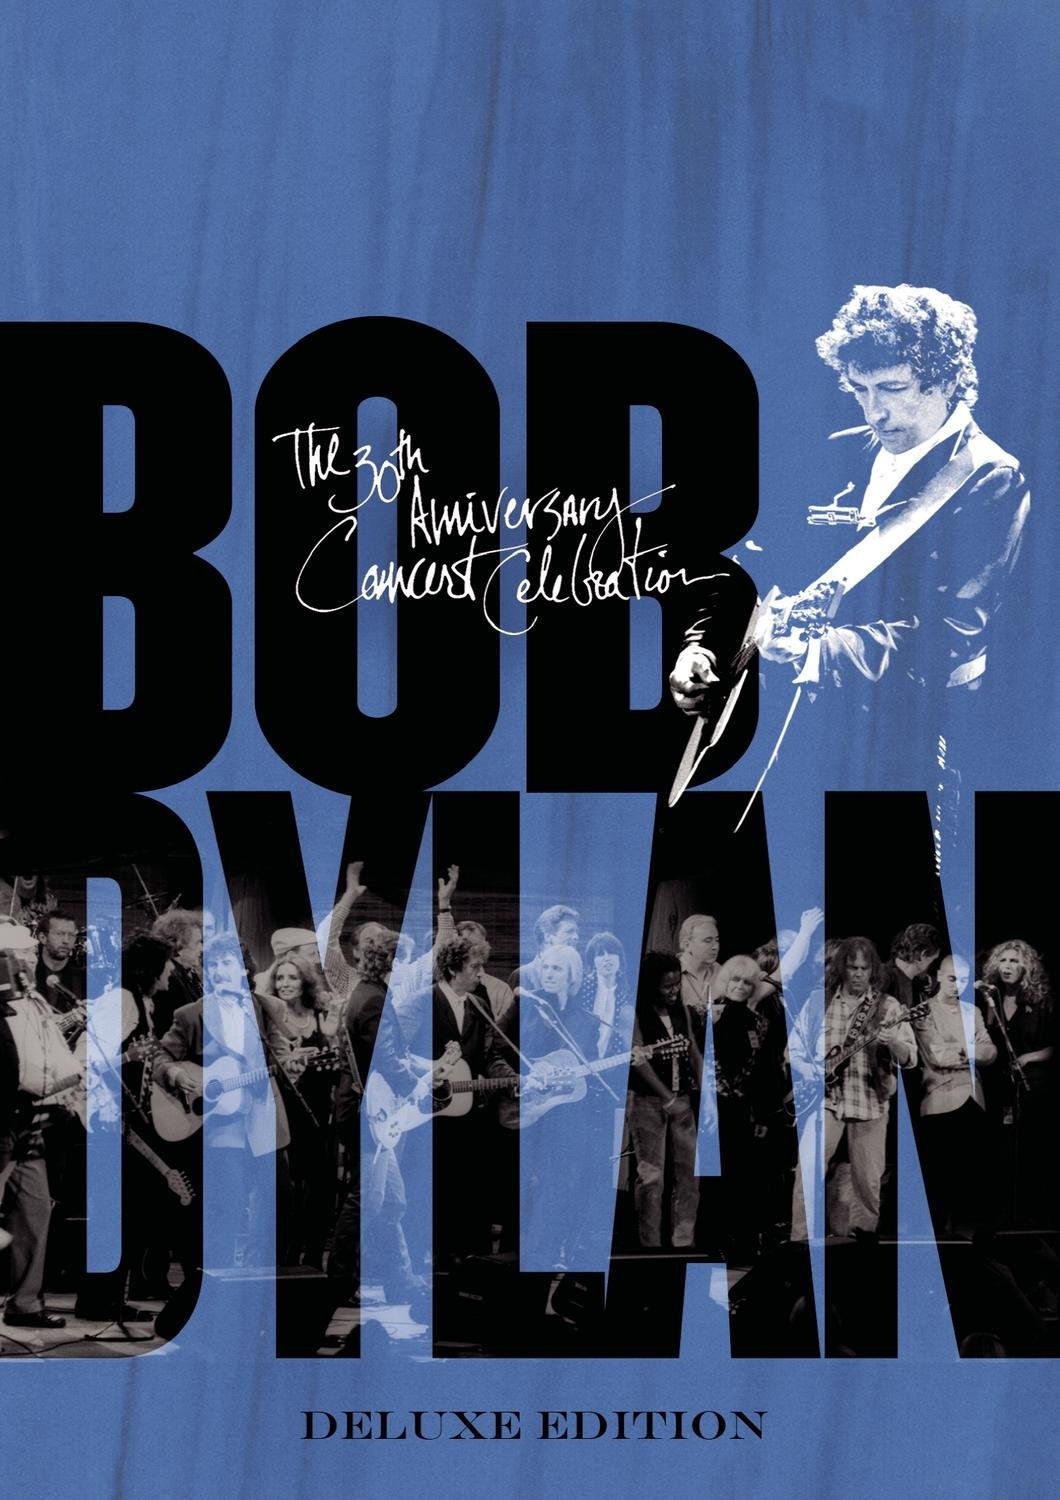 Bob Dylan - The 30th Anniversary Concert Celebration [Deluxe Edition] [2 DVDs] [Deluxe Edition]